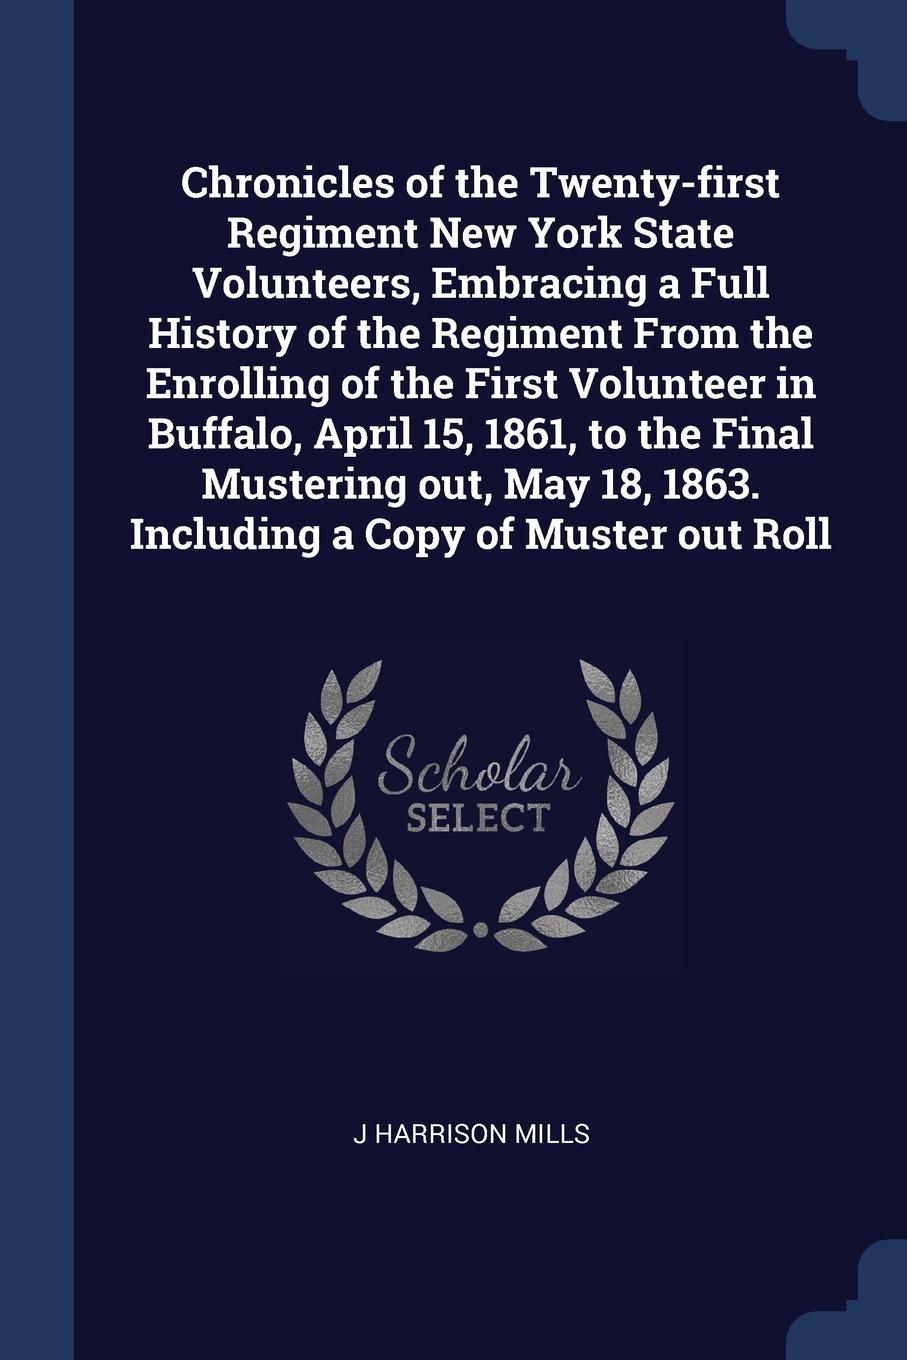 Chronicles of the Twenty-first Regiment New York State Volunteers, Embracing a Full History of the Regiment From the Enrolling of the First Volunteer in Buffalo, April 15, 1861, to the Final Mustering out, May 18, 1863. Including a Copy of Muster ...